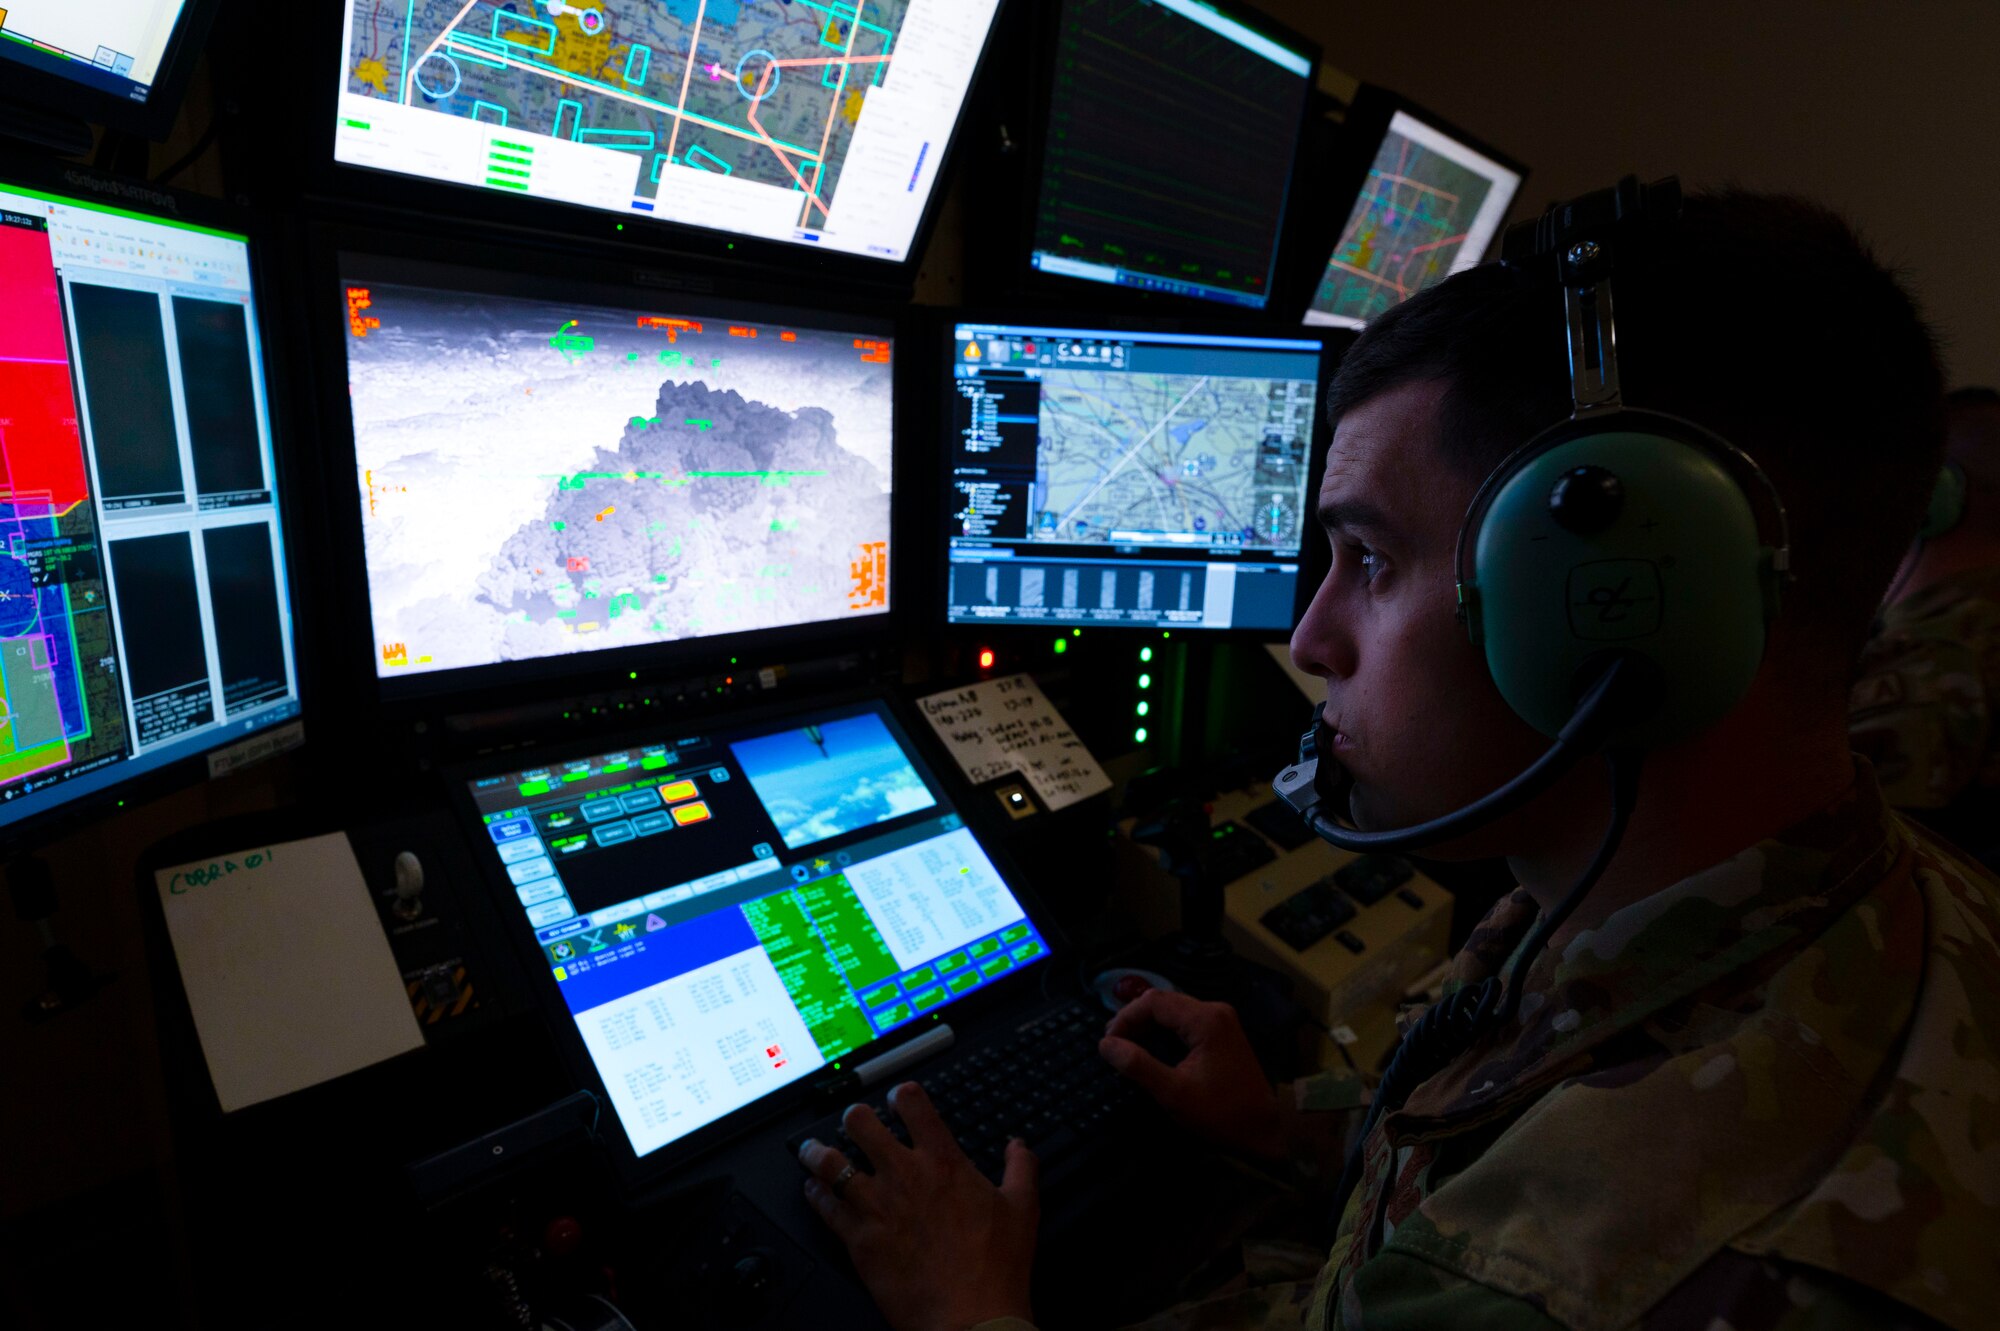 U.S. Air Force 2nd Lt. Loftus, 491st Attack Squadron student pilot, is seen monitoring and piloting an MQ-9 Reaper in a ground control station at Hancock Field Air National Guard Base, New York, June 27, 2023. The 491st ATKS instructors train MQ-9 student pilots and sensor operators in real-world combat scenarios that will be present in operational environments. (U.S. Air Force photo by Airman 1st Class Isaiah Pedrazzini)